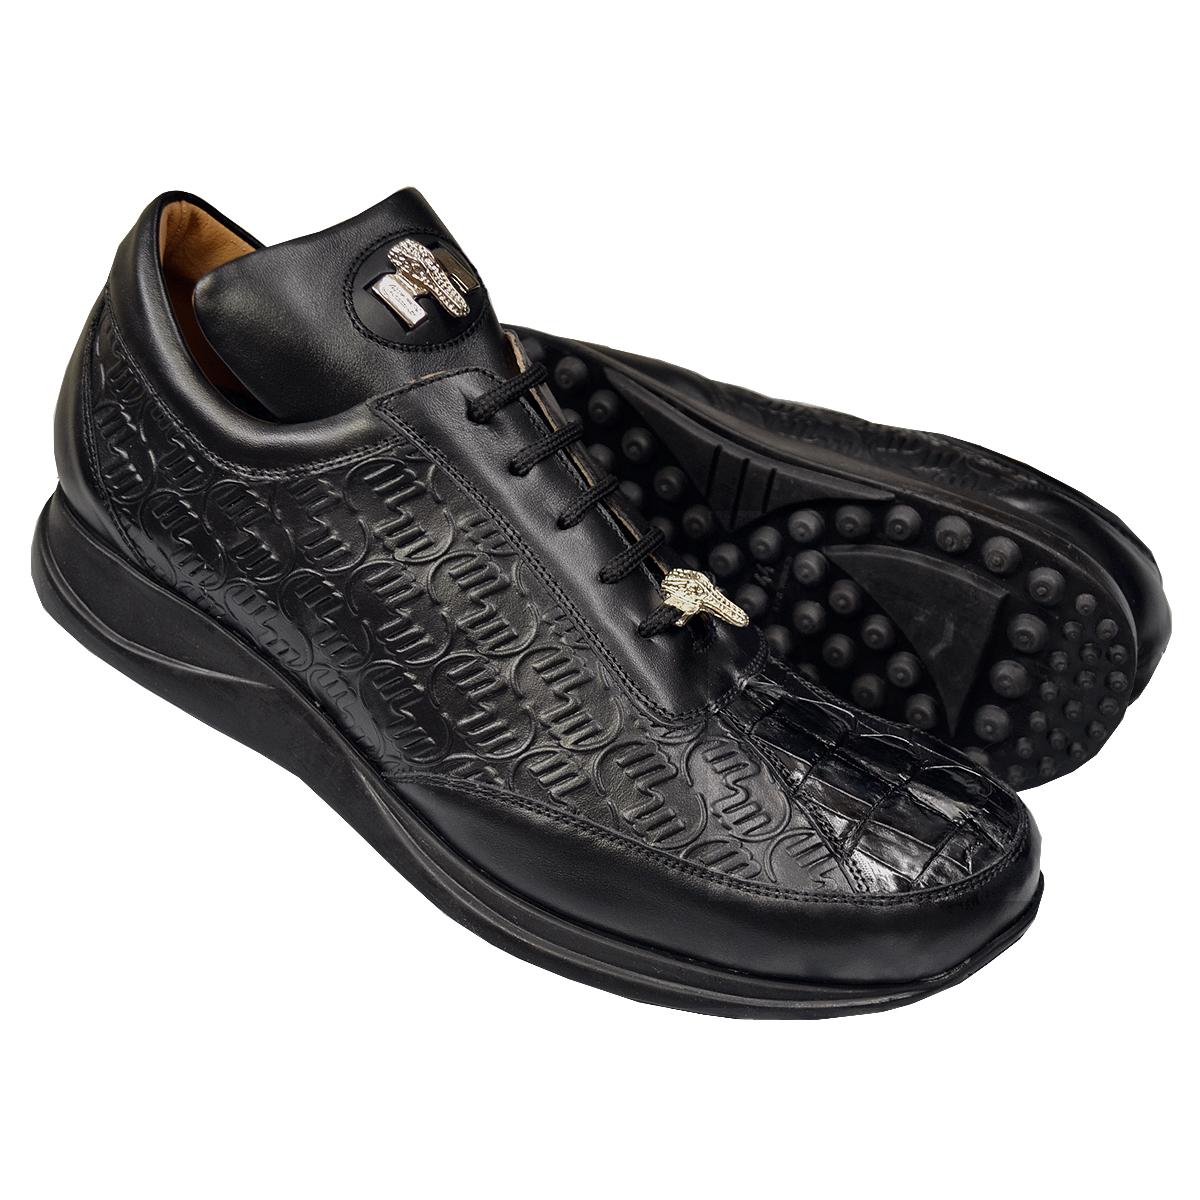 Mauri 4936 Smooth Men's Shoes Black & Gold Exotic Alligator / Didier Fabric Oxfords (MA5361) Multi / 12 US